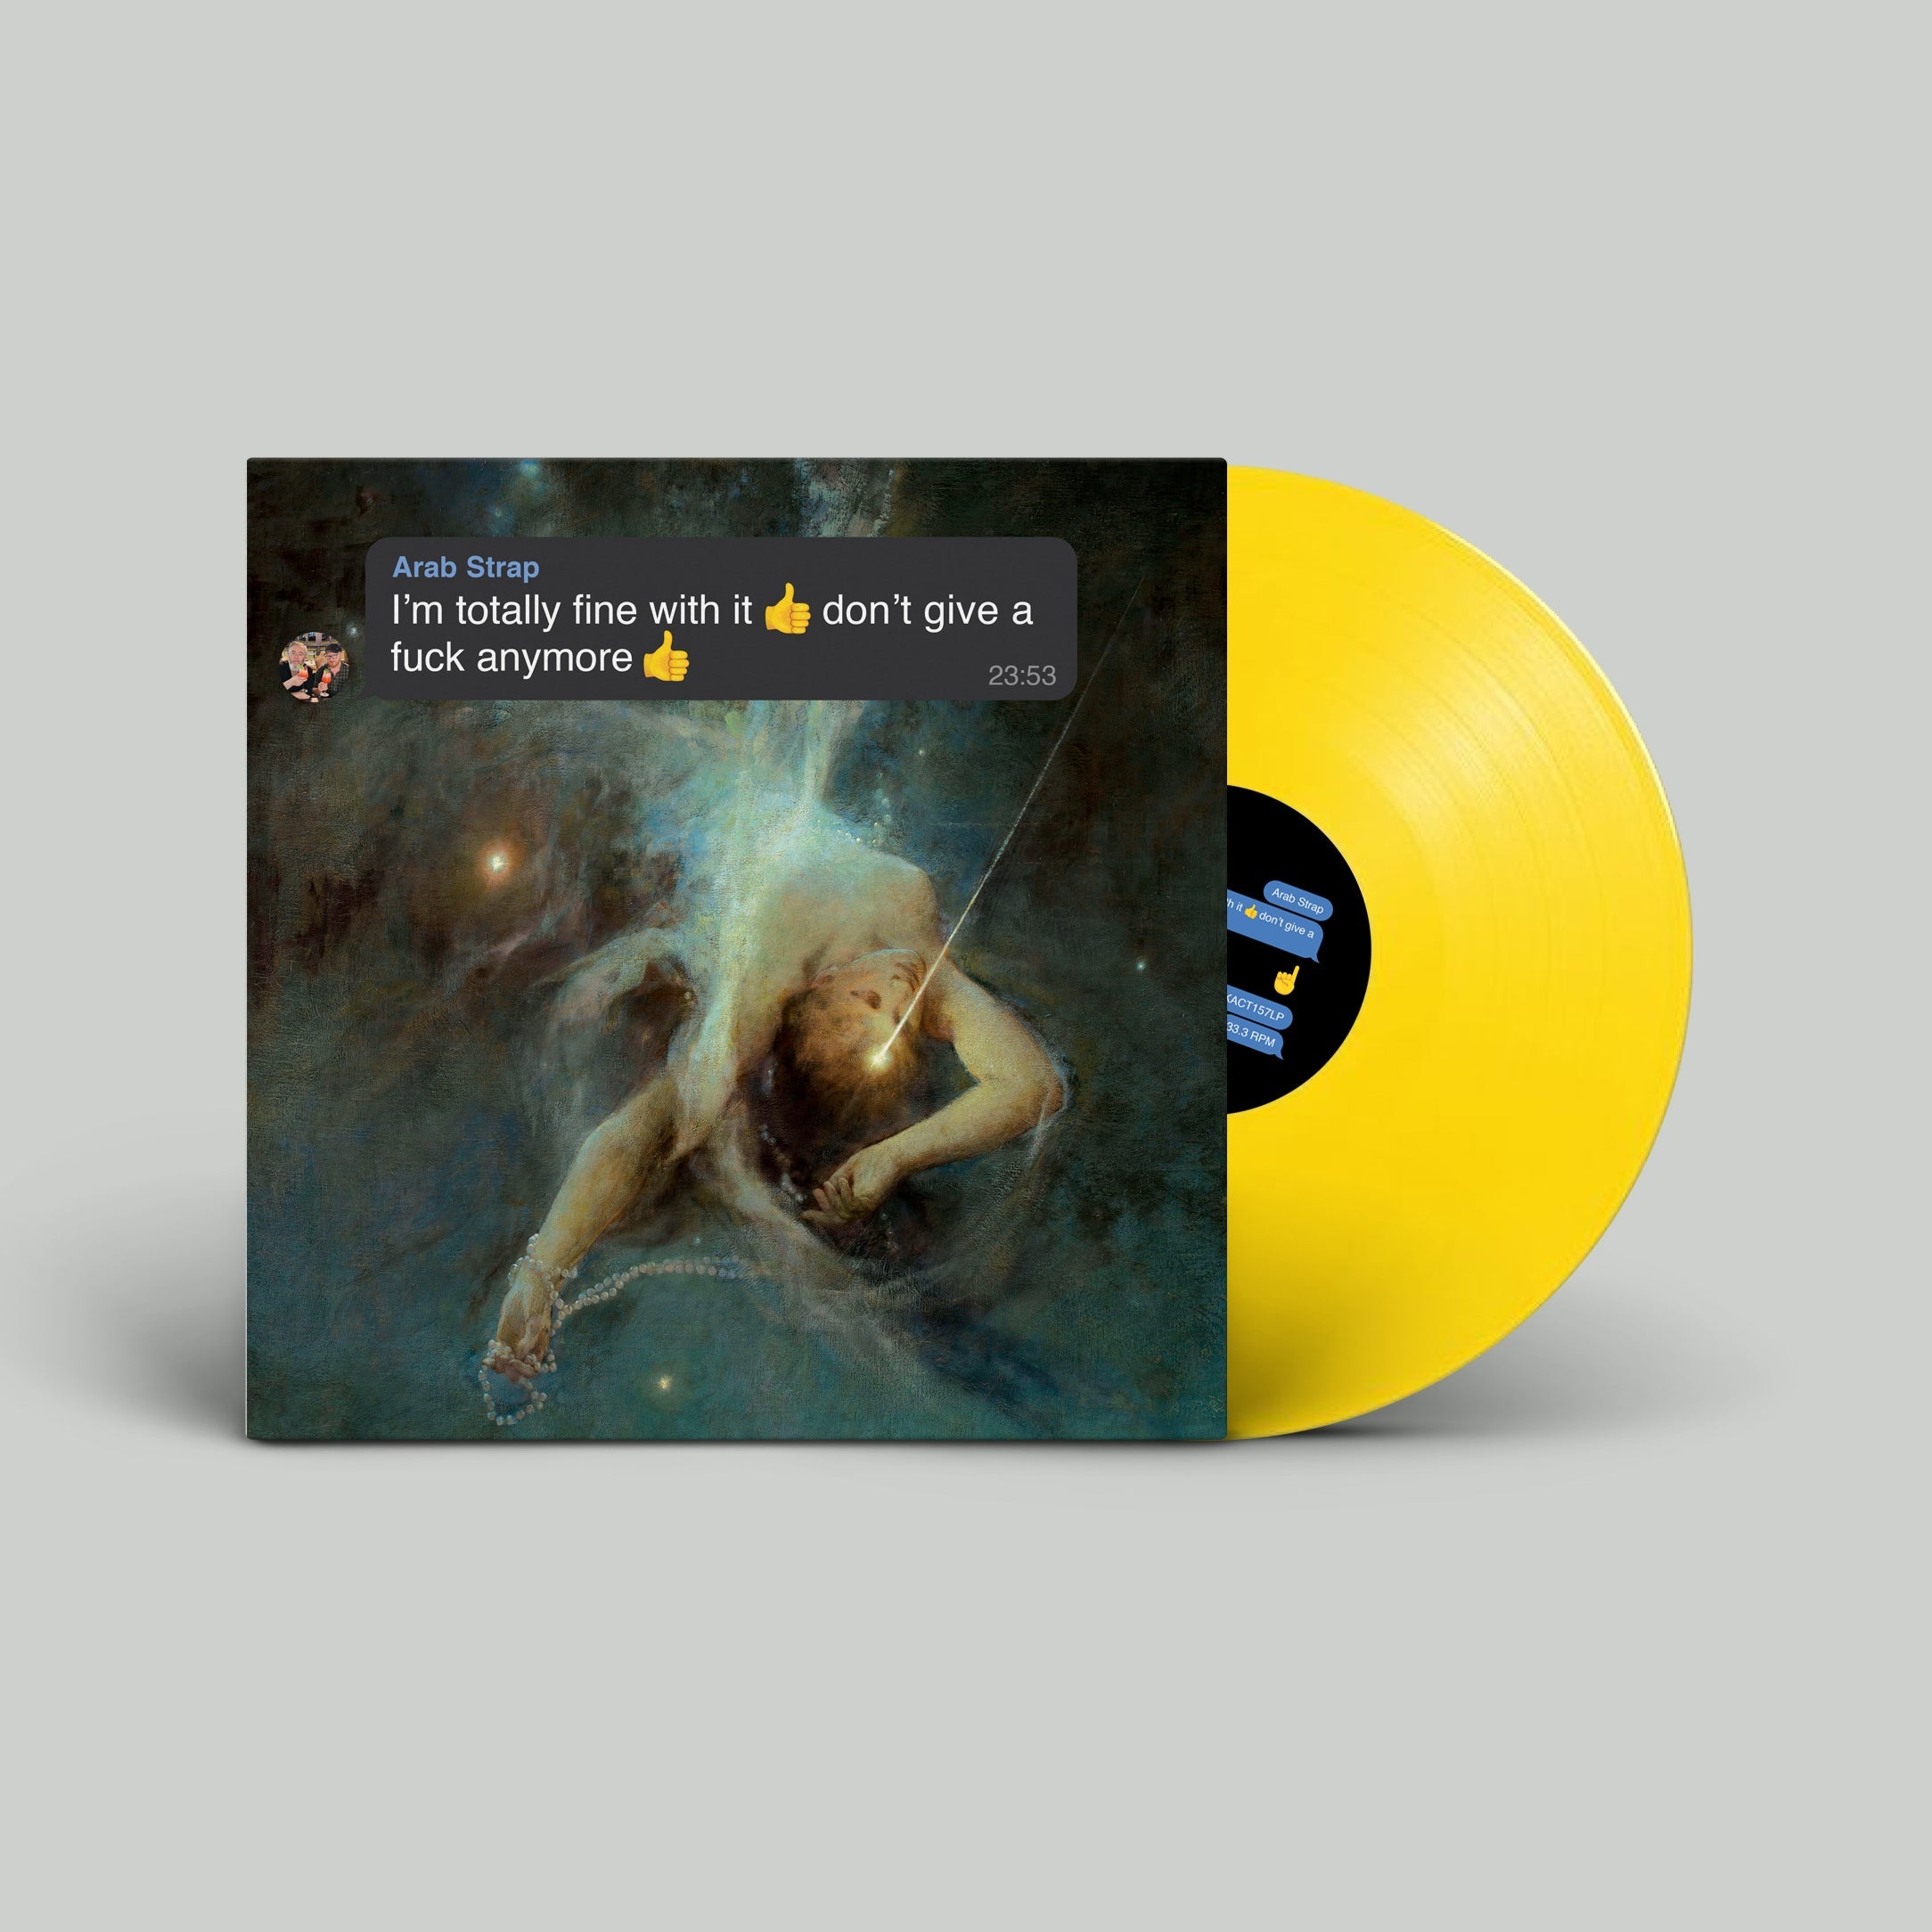 I’m totally fine with it 👍don’t give a fuck anymore 👍: Limited 'Emoji Yellow' Vinyl LP & Signed Double Sided Print